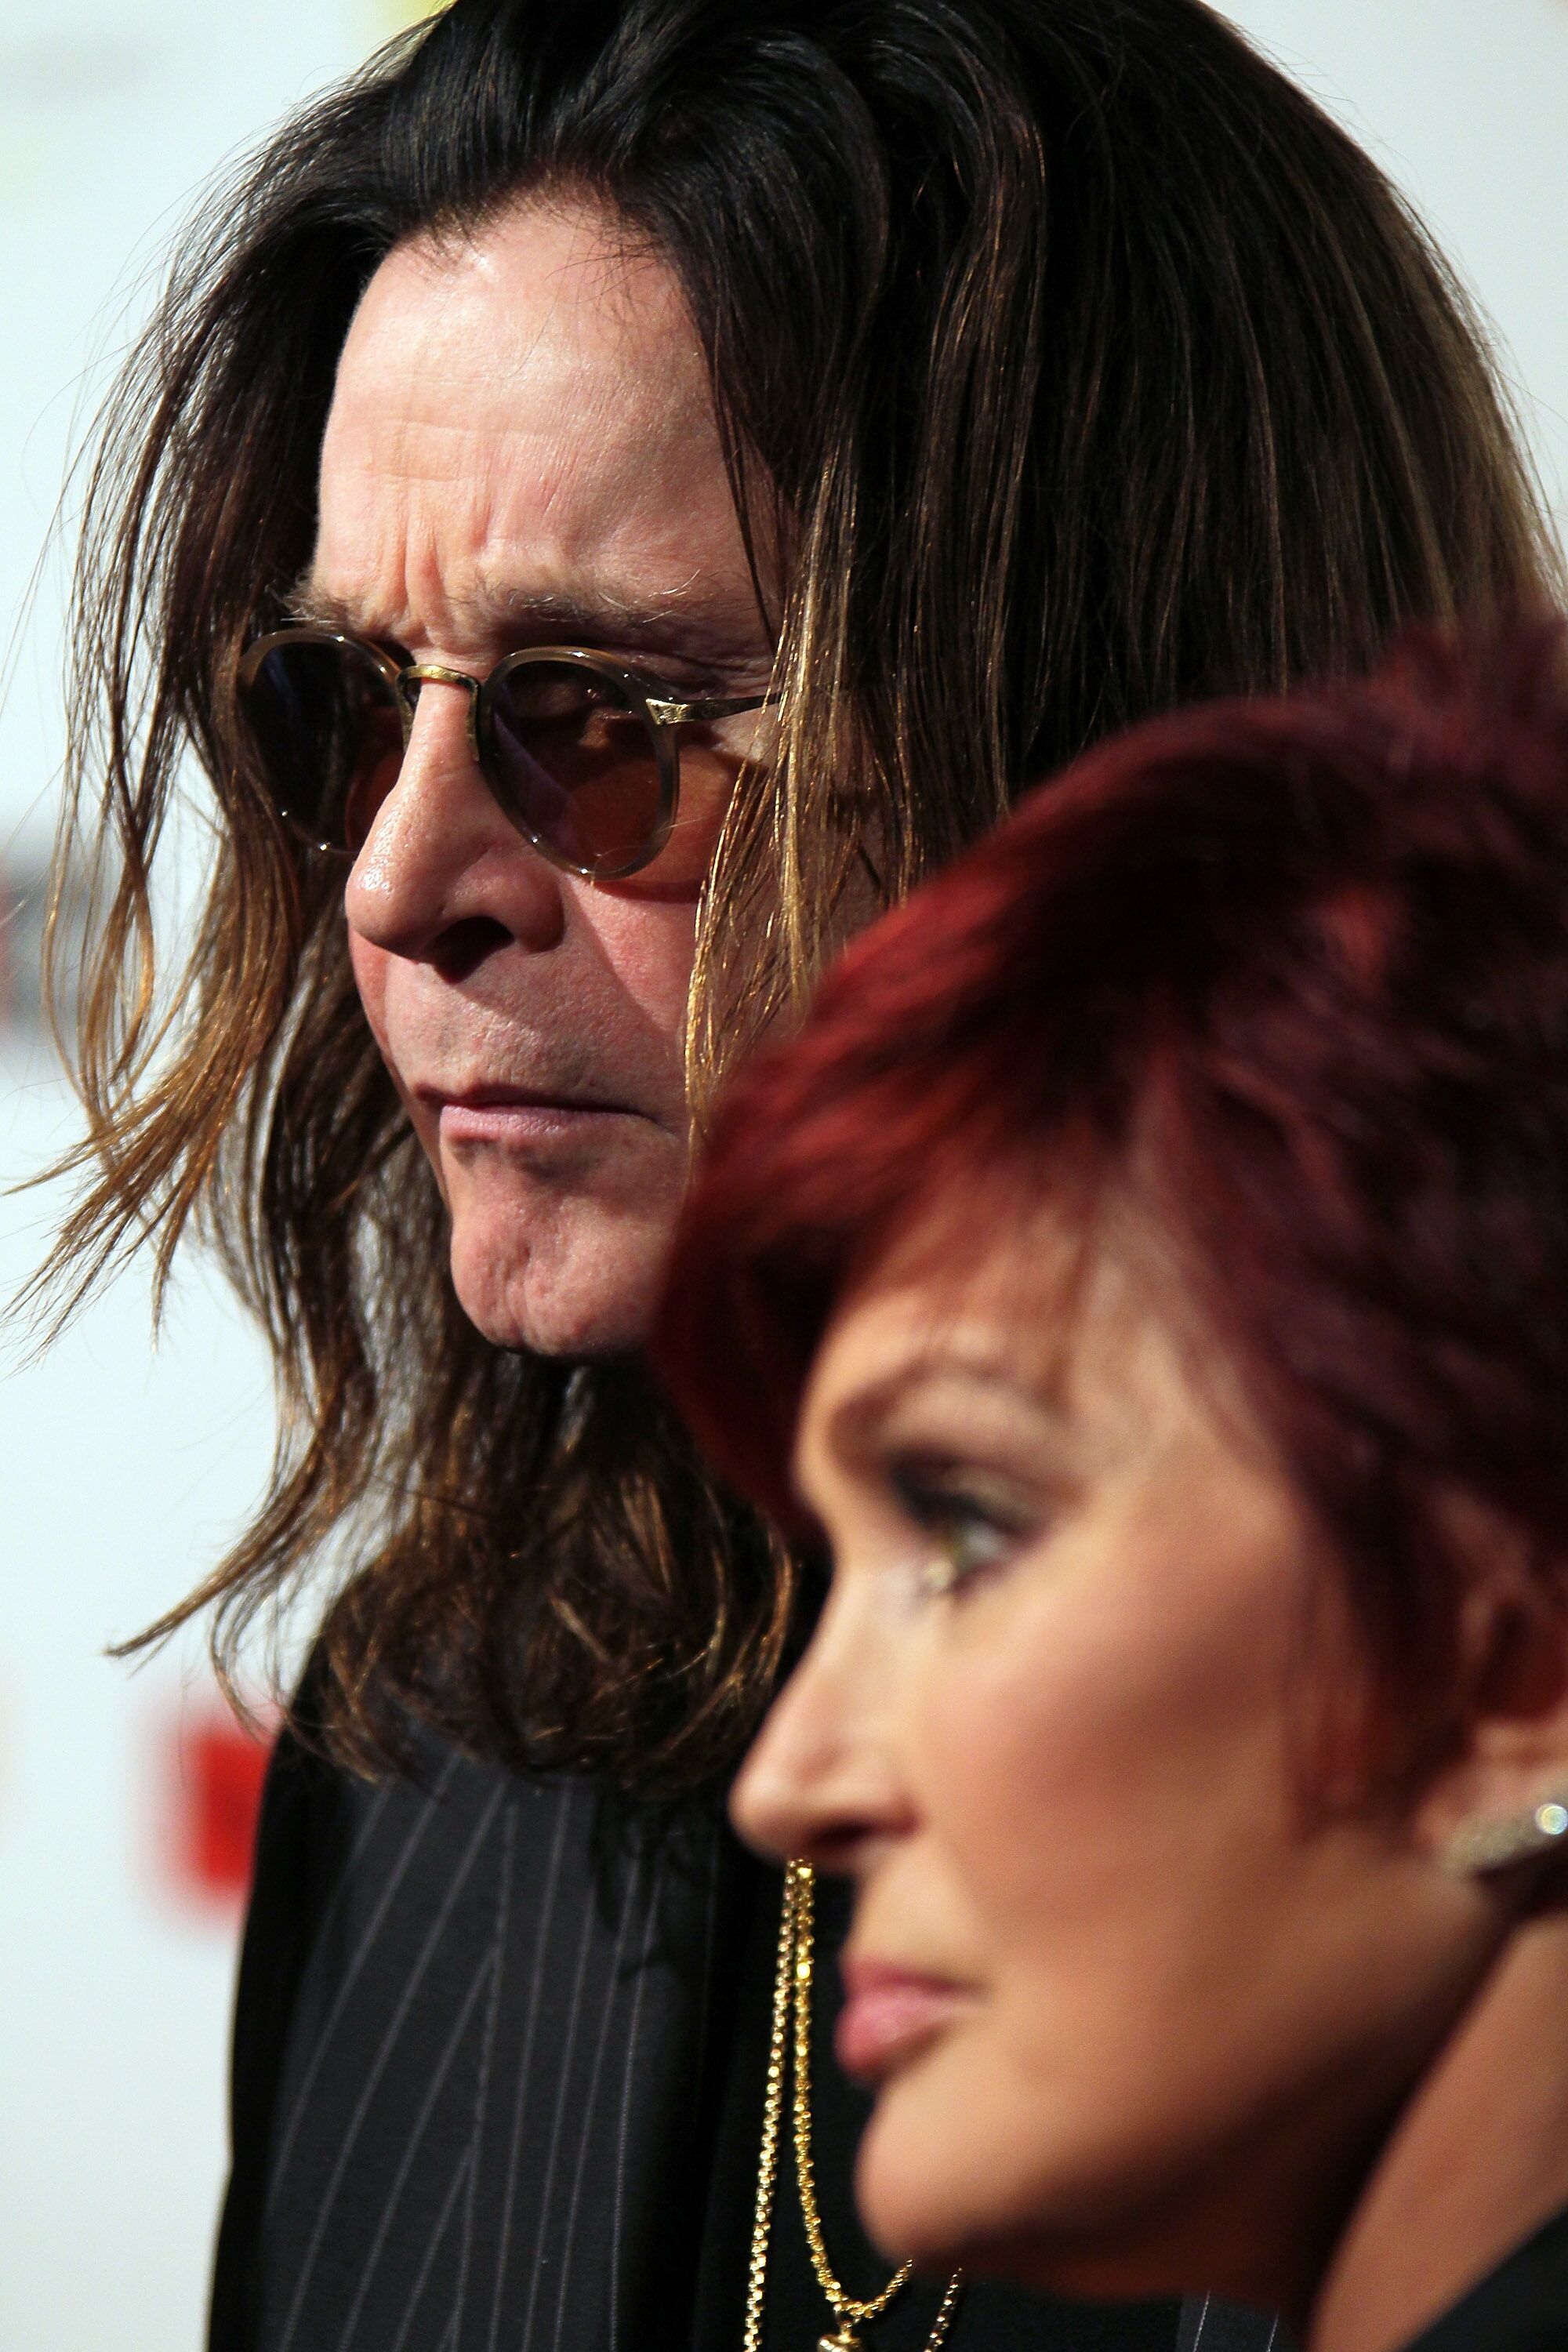  Osbourne and wife TV personality Sharon Osbourne attend the 10th Annual Classic Rock Awards. | Source: Getty Images